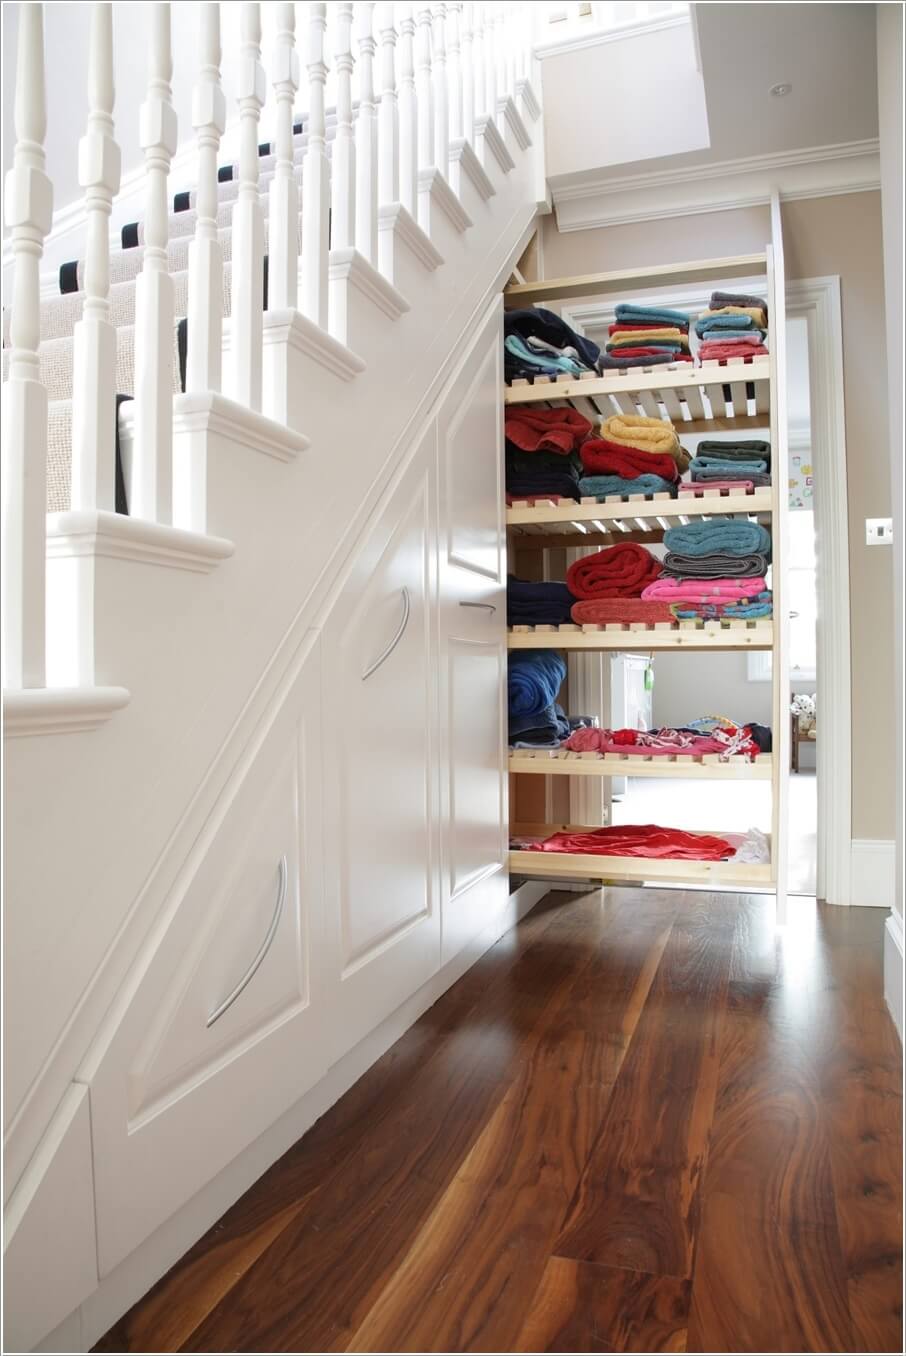 10 Ideas for The Space Under The Stairs 